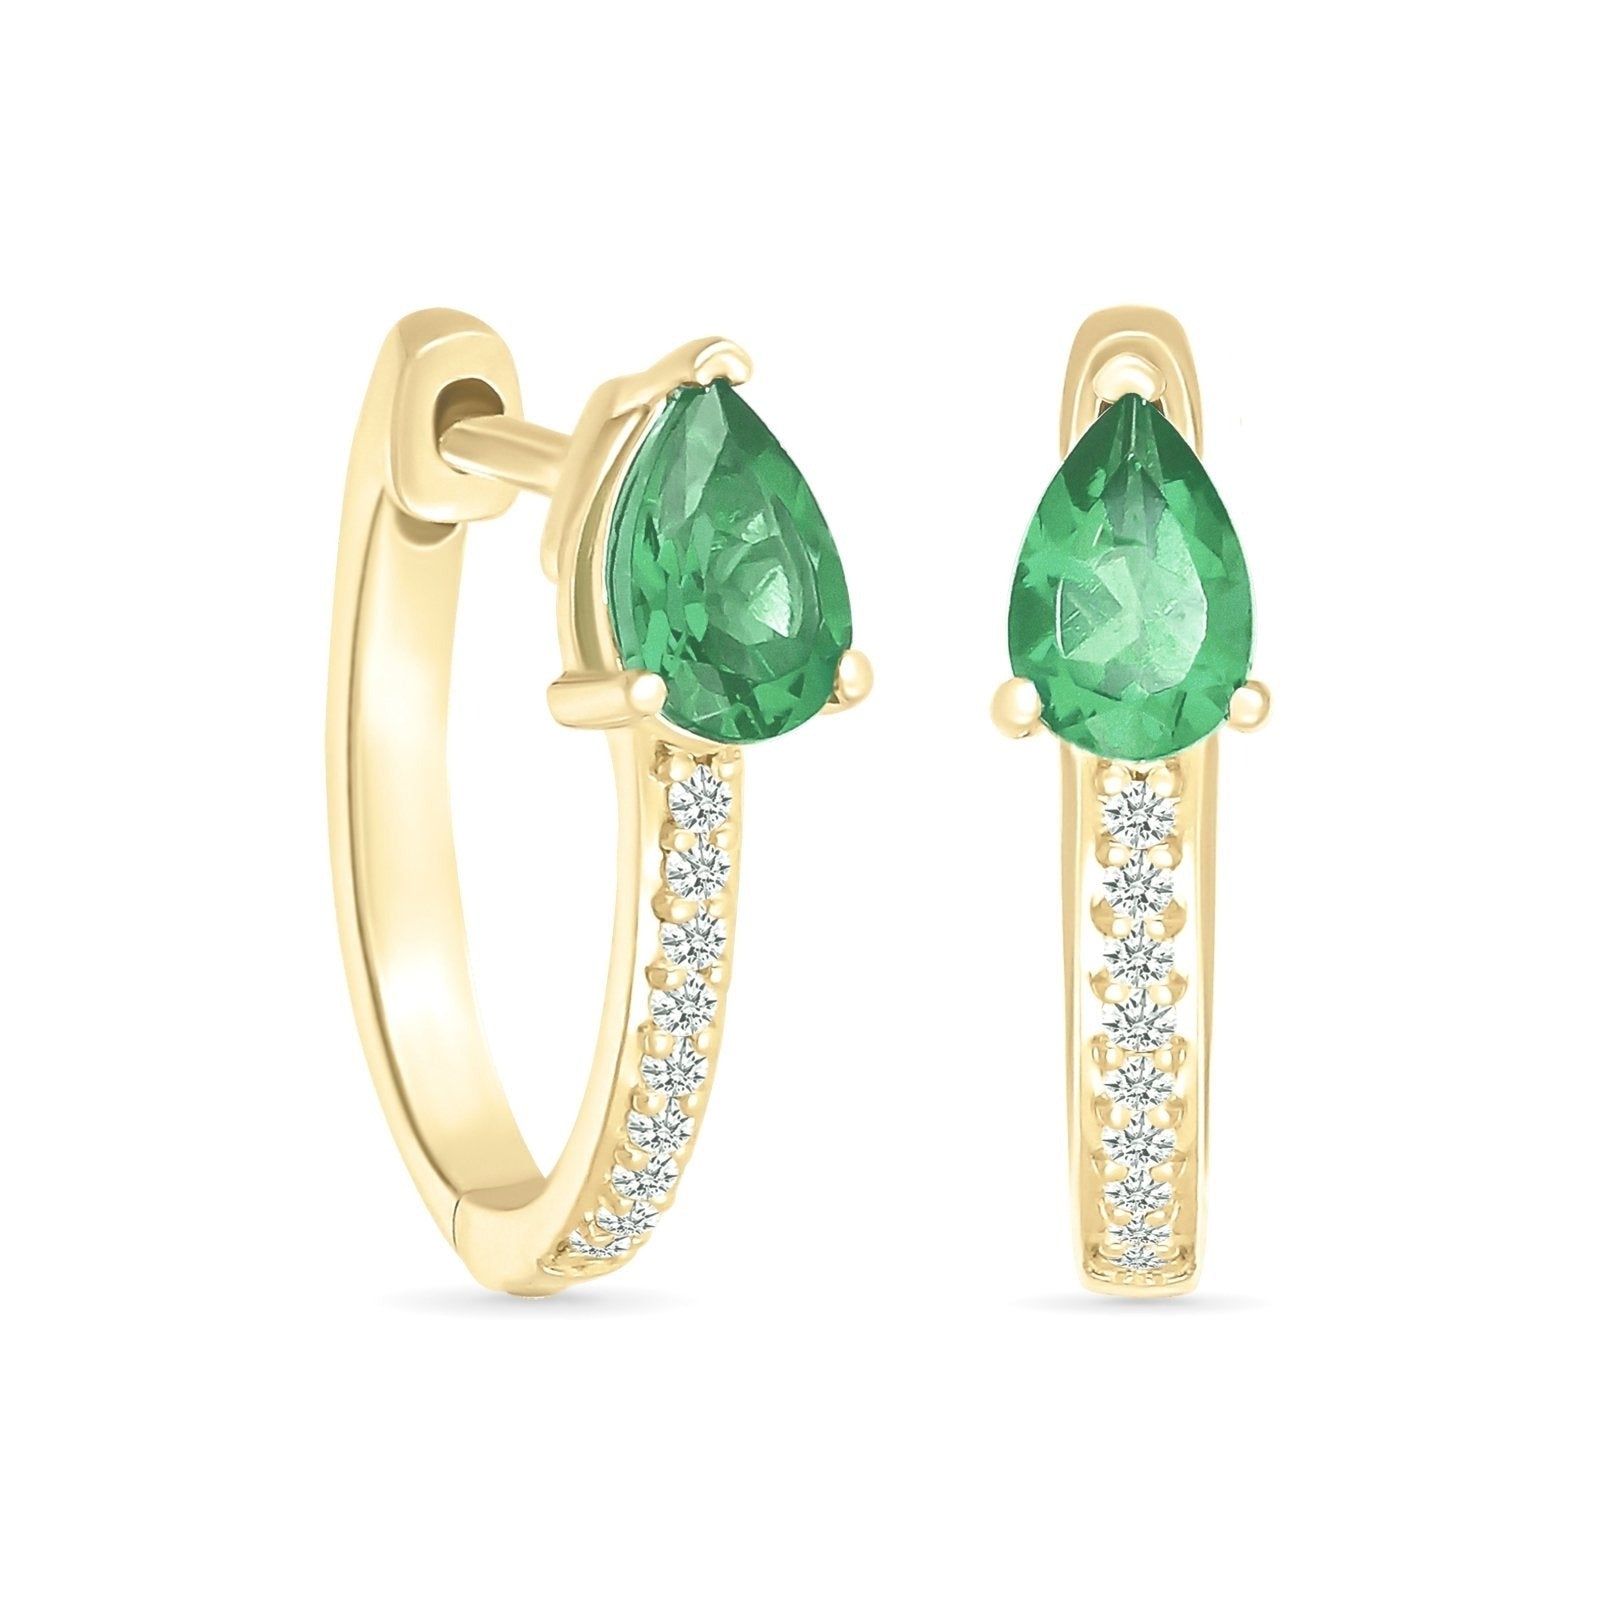 Teardrop Shaped Emerald and White Sapphire Hoop Earrings Earrings Estella Collection #product_description# 32676 10k Birthstone Birthstone Jewelry #tag4# #tag5# #tag6# #tag7# #tag8# #tag9# #tag10#